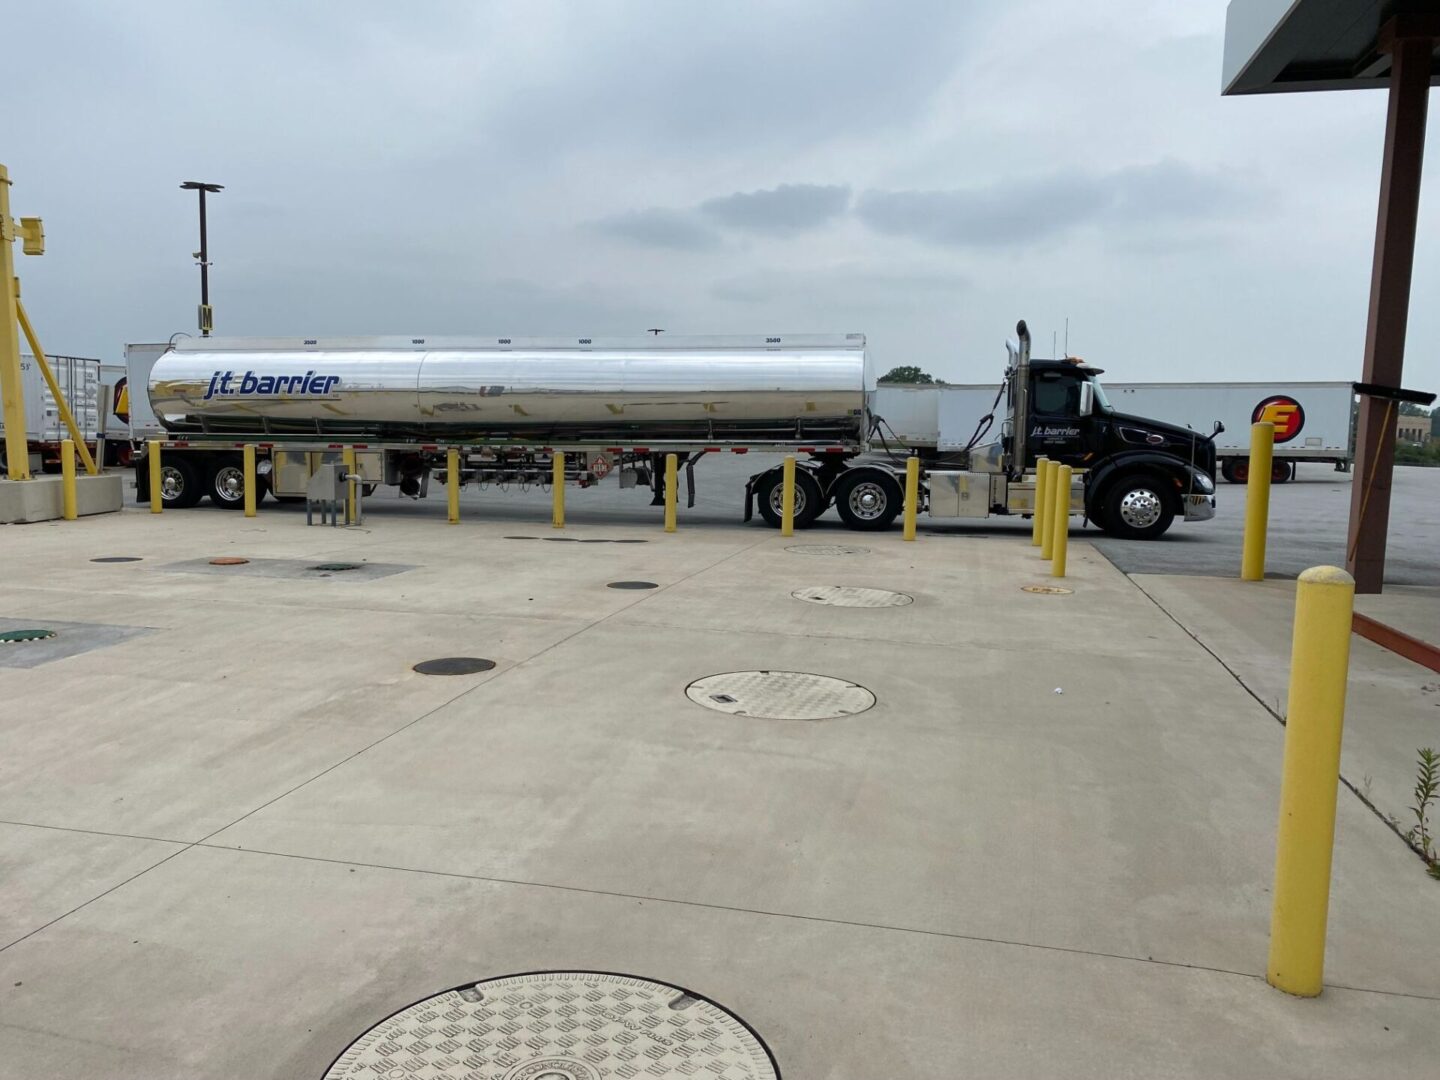 A large truck is parked in front of a gas station.